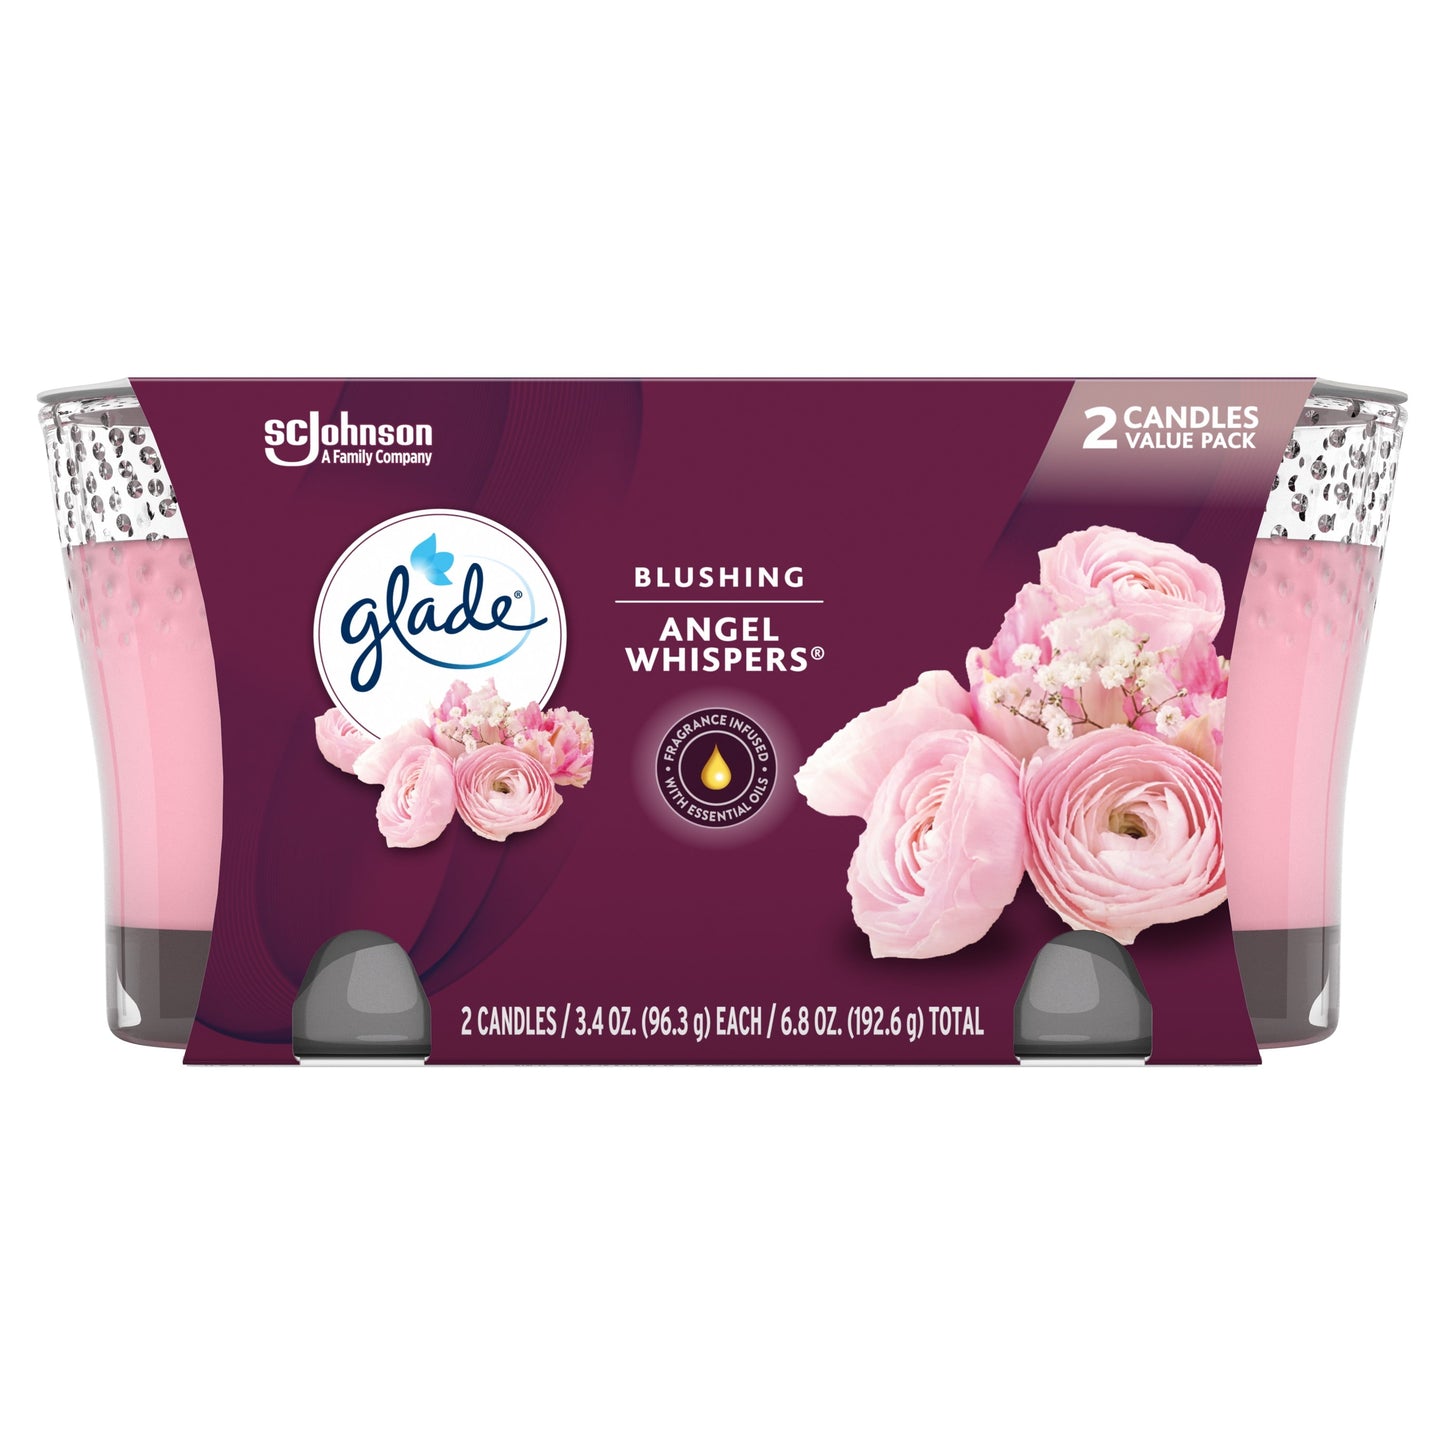 Glade Candle Angel Whispers Scent, 1-Wick, 3.4 oz (96.3 g) Each, 2 Counts, Fragrance Infused with Essential Oils, Notes of Bulgarian Rose, Peach, White Floral Bouquet, Lead-Free Wick Scented Candles